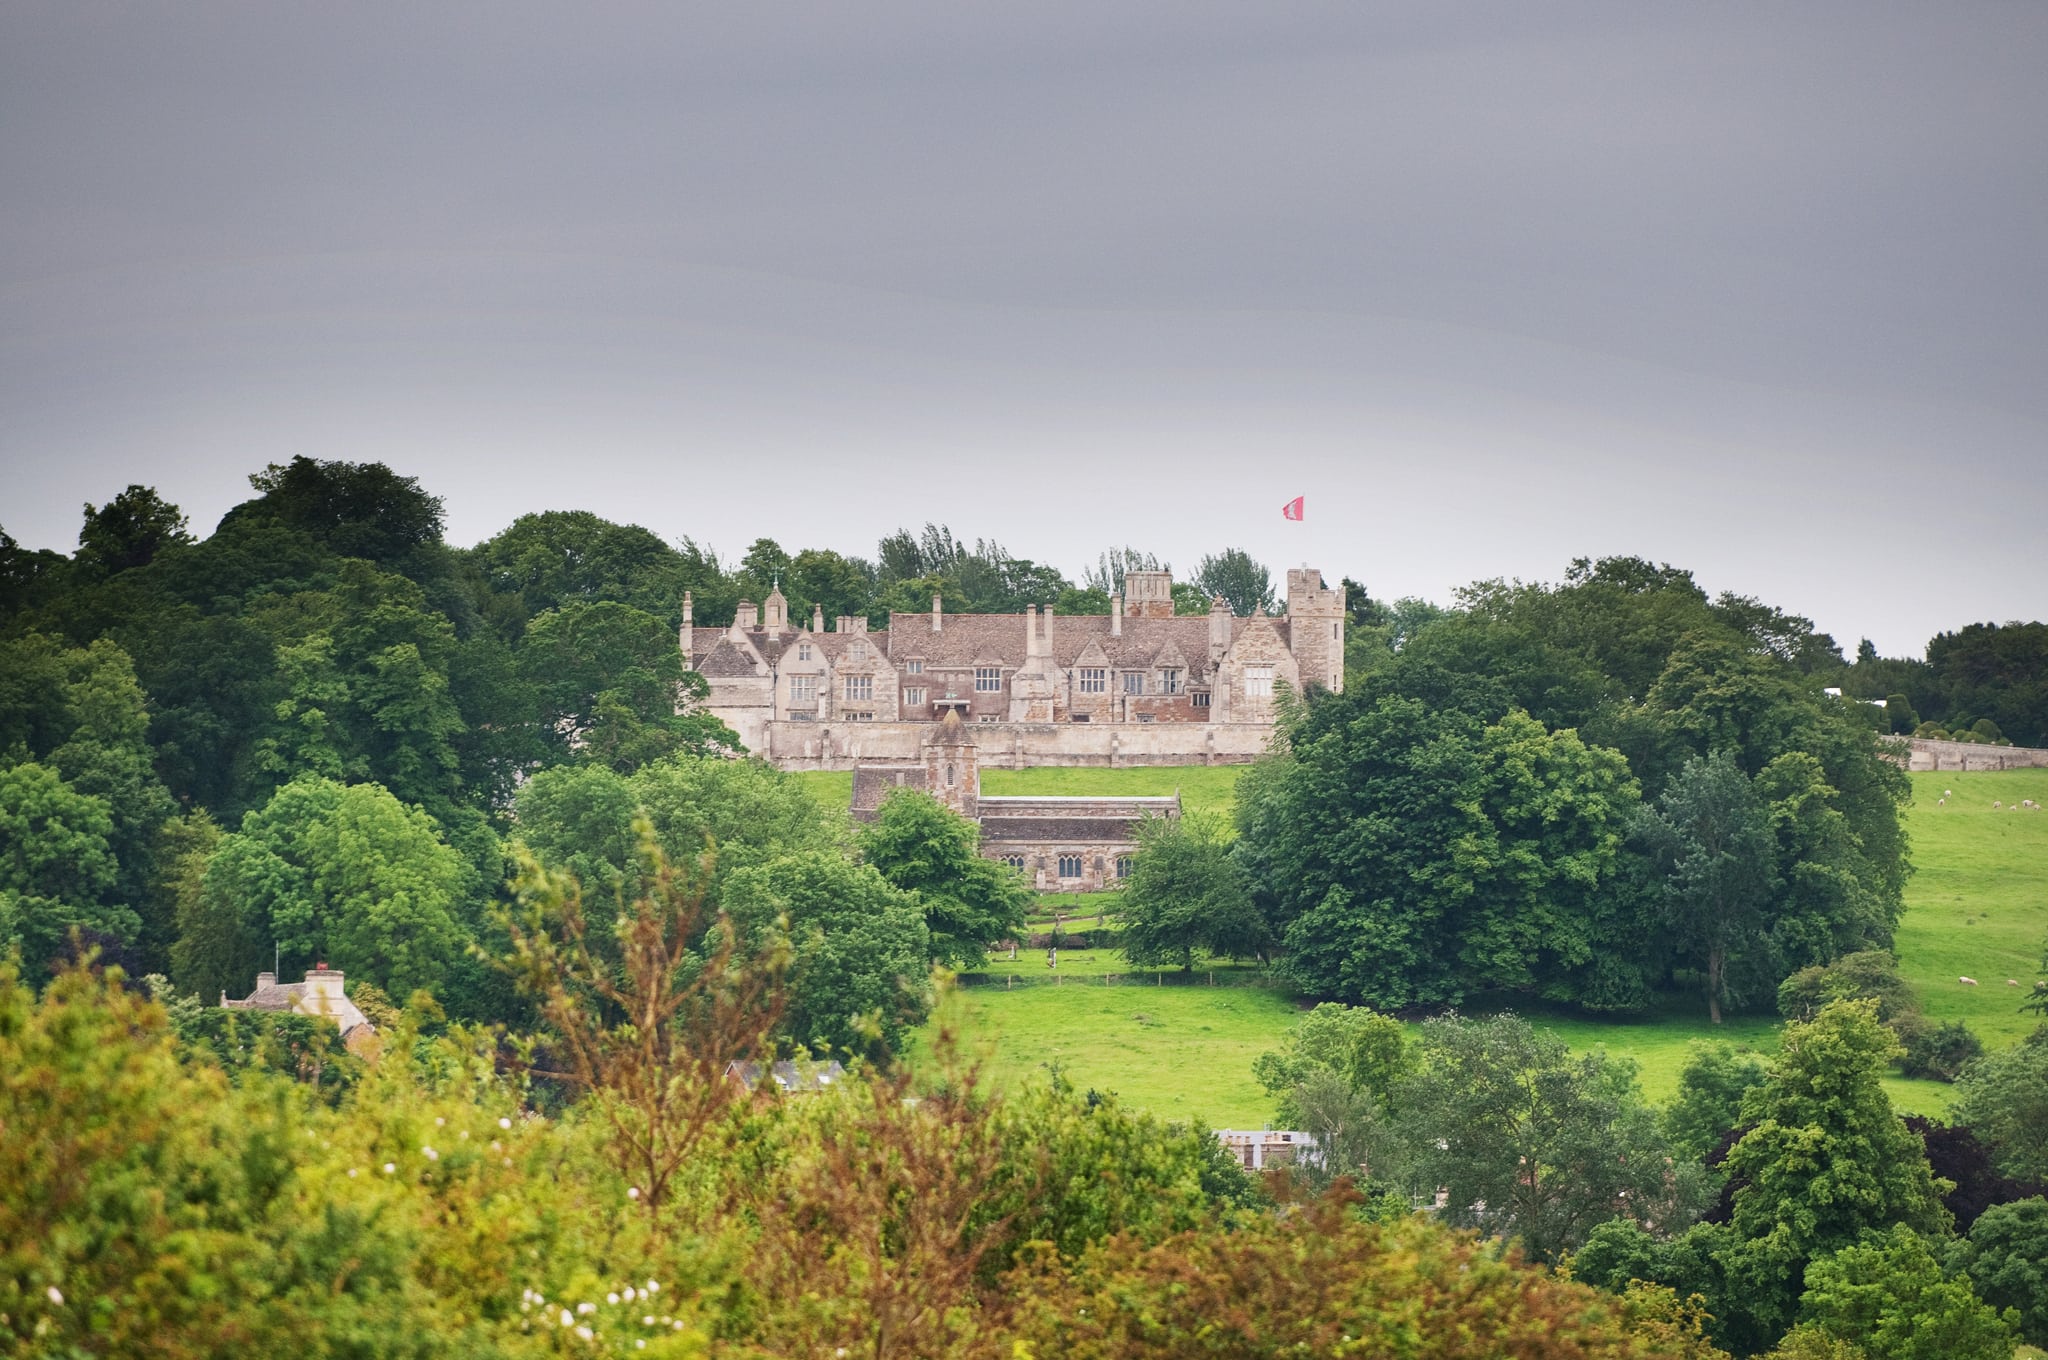 A view of Rockingham Castle sitting on the hill taken from Rockingham village